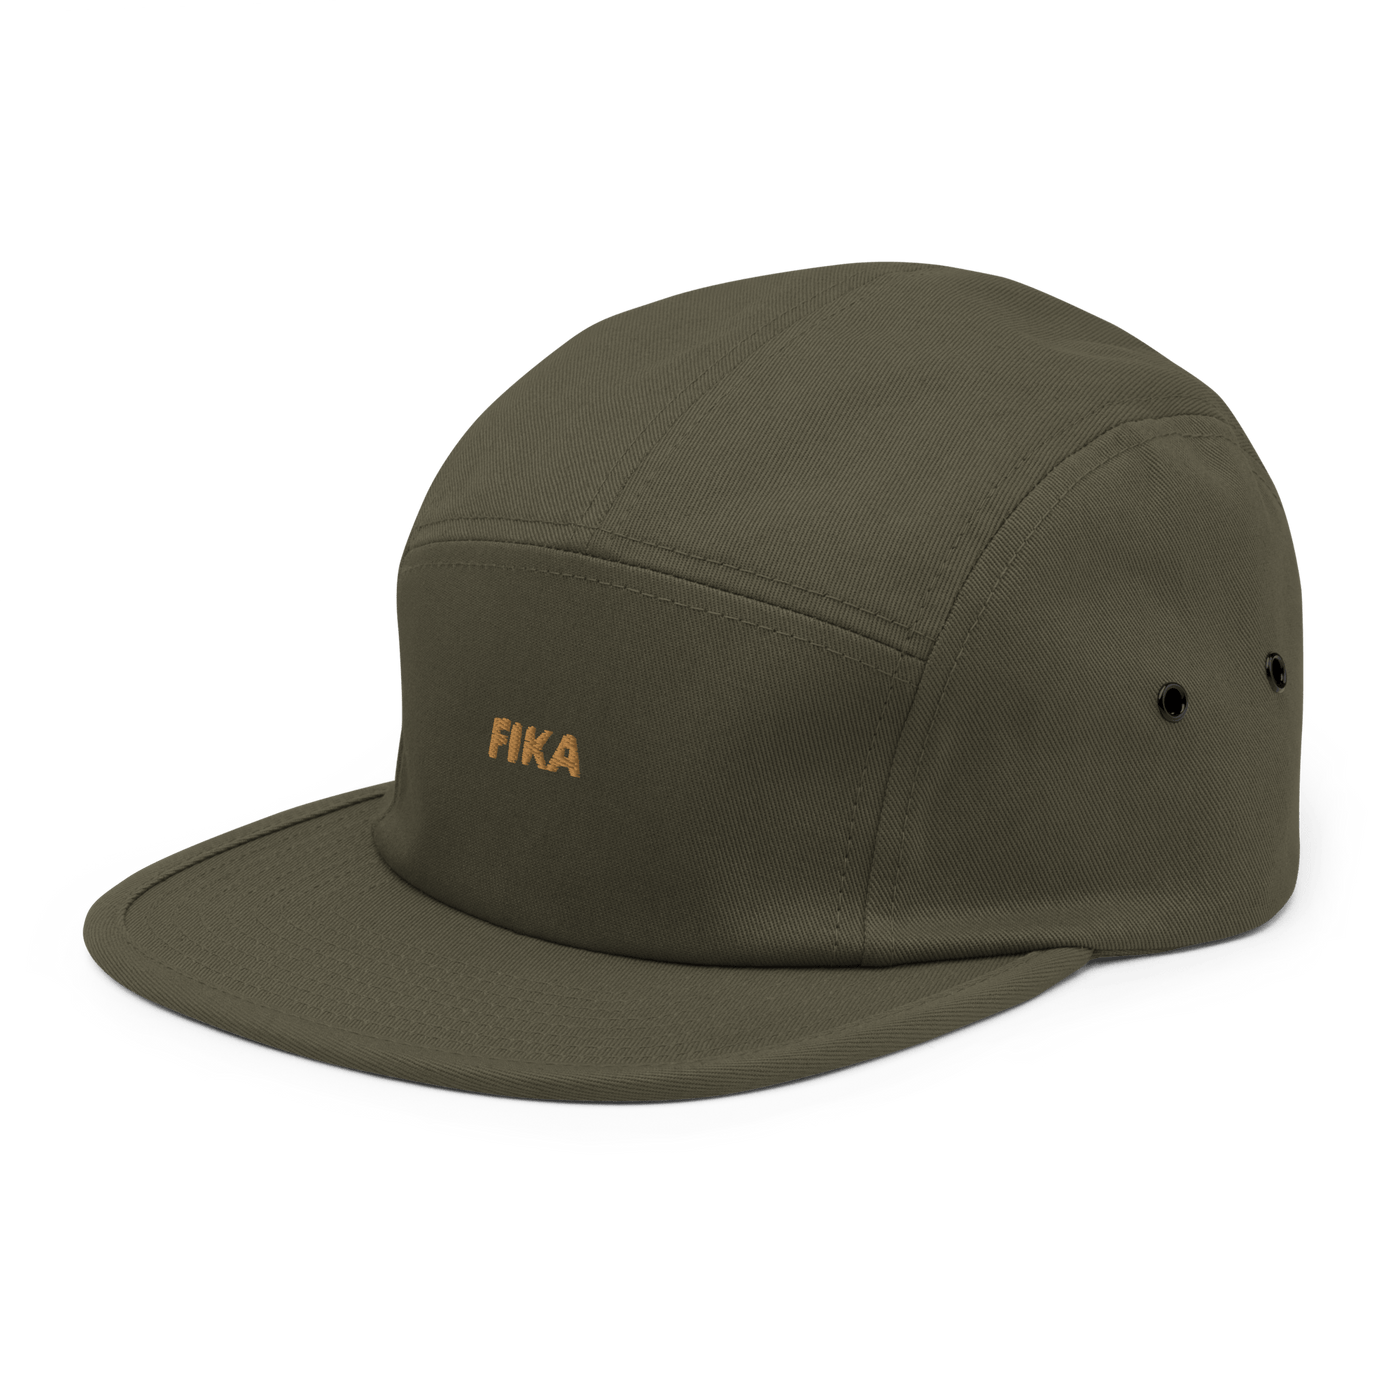 FIKA Five Panel Cap - Olive - - Just Another Cap Store